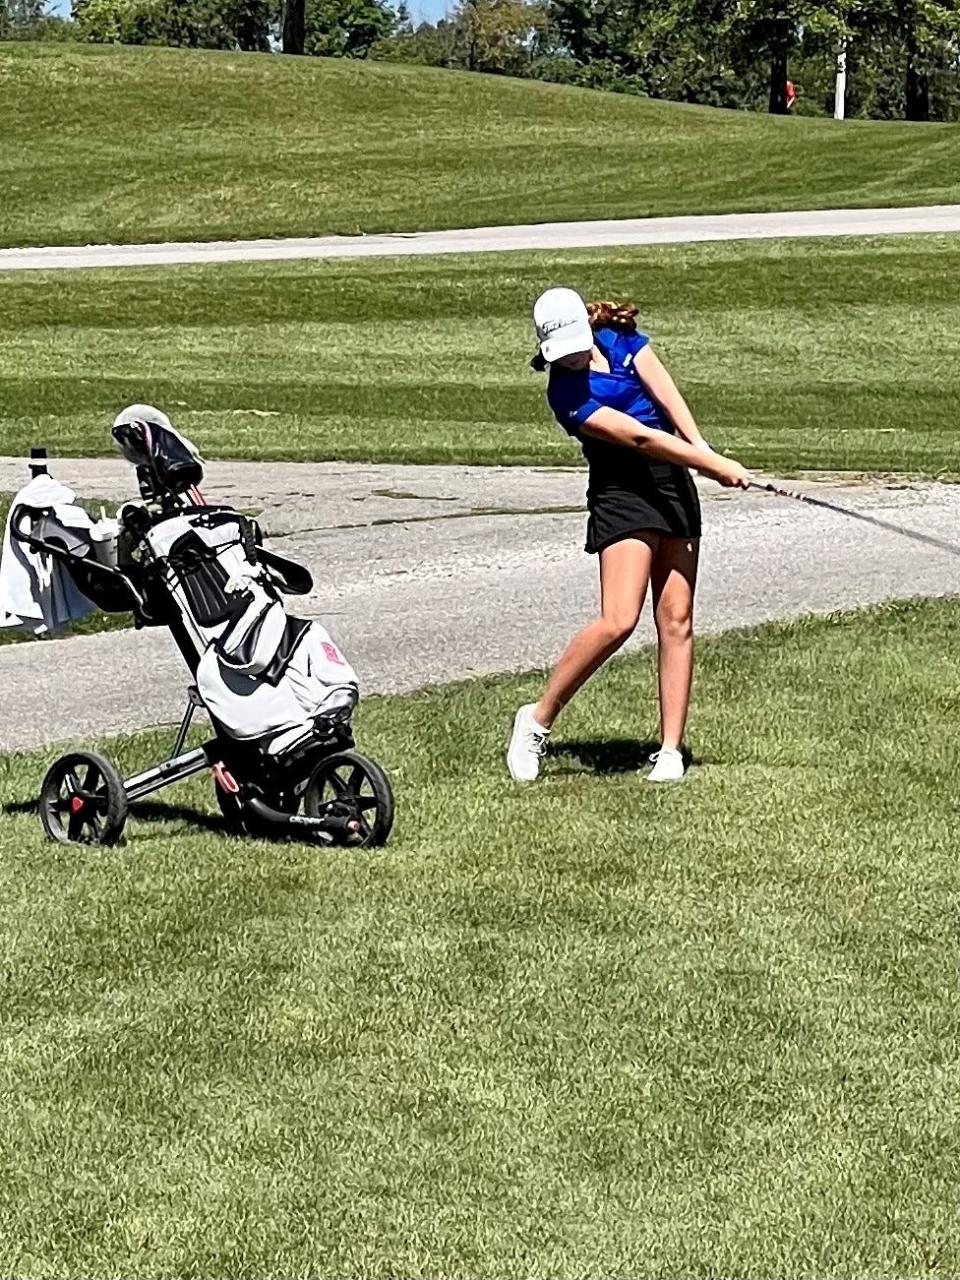 Highland's Ceci Grassbaugh chips onto the green at Oakhaven during the second Mid Ohio Athletic Conference Golf Tournament on Tuesday.